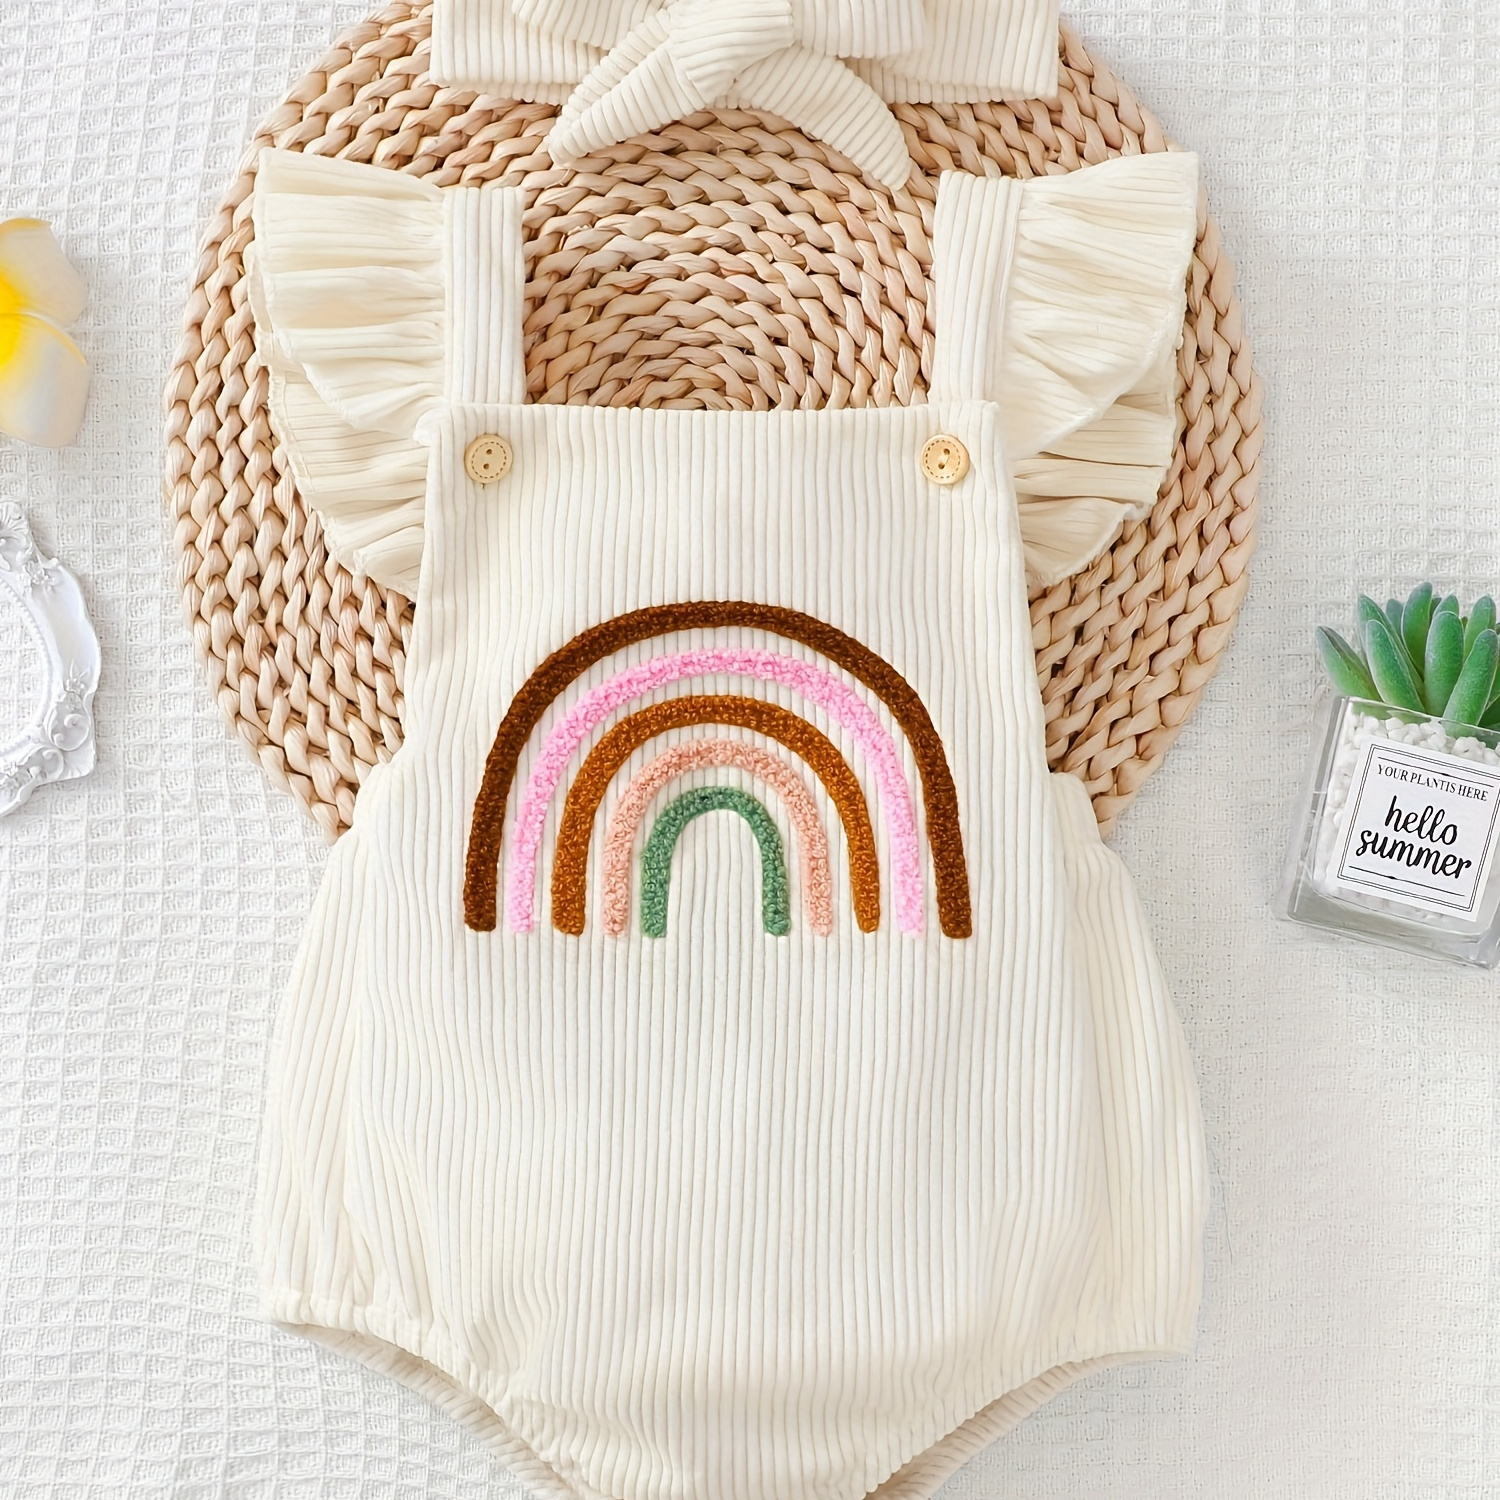 

Baby Girls Romper Set, Rainbow Embroidery, Strap, Sleeveless Bodysuit With Matching Headband, Cute Style, Cotton Outfit